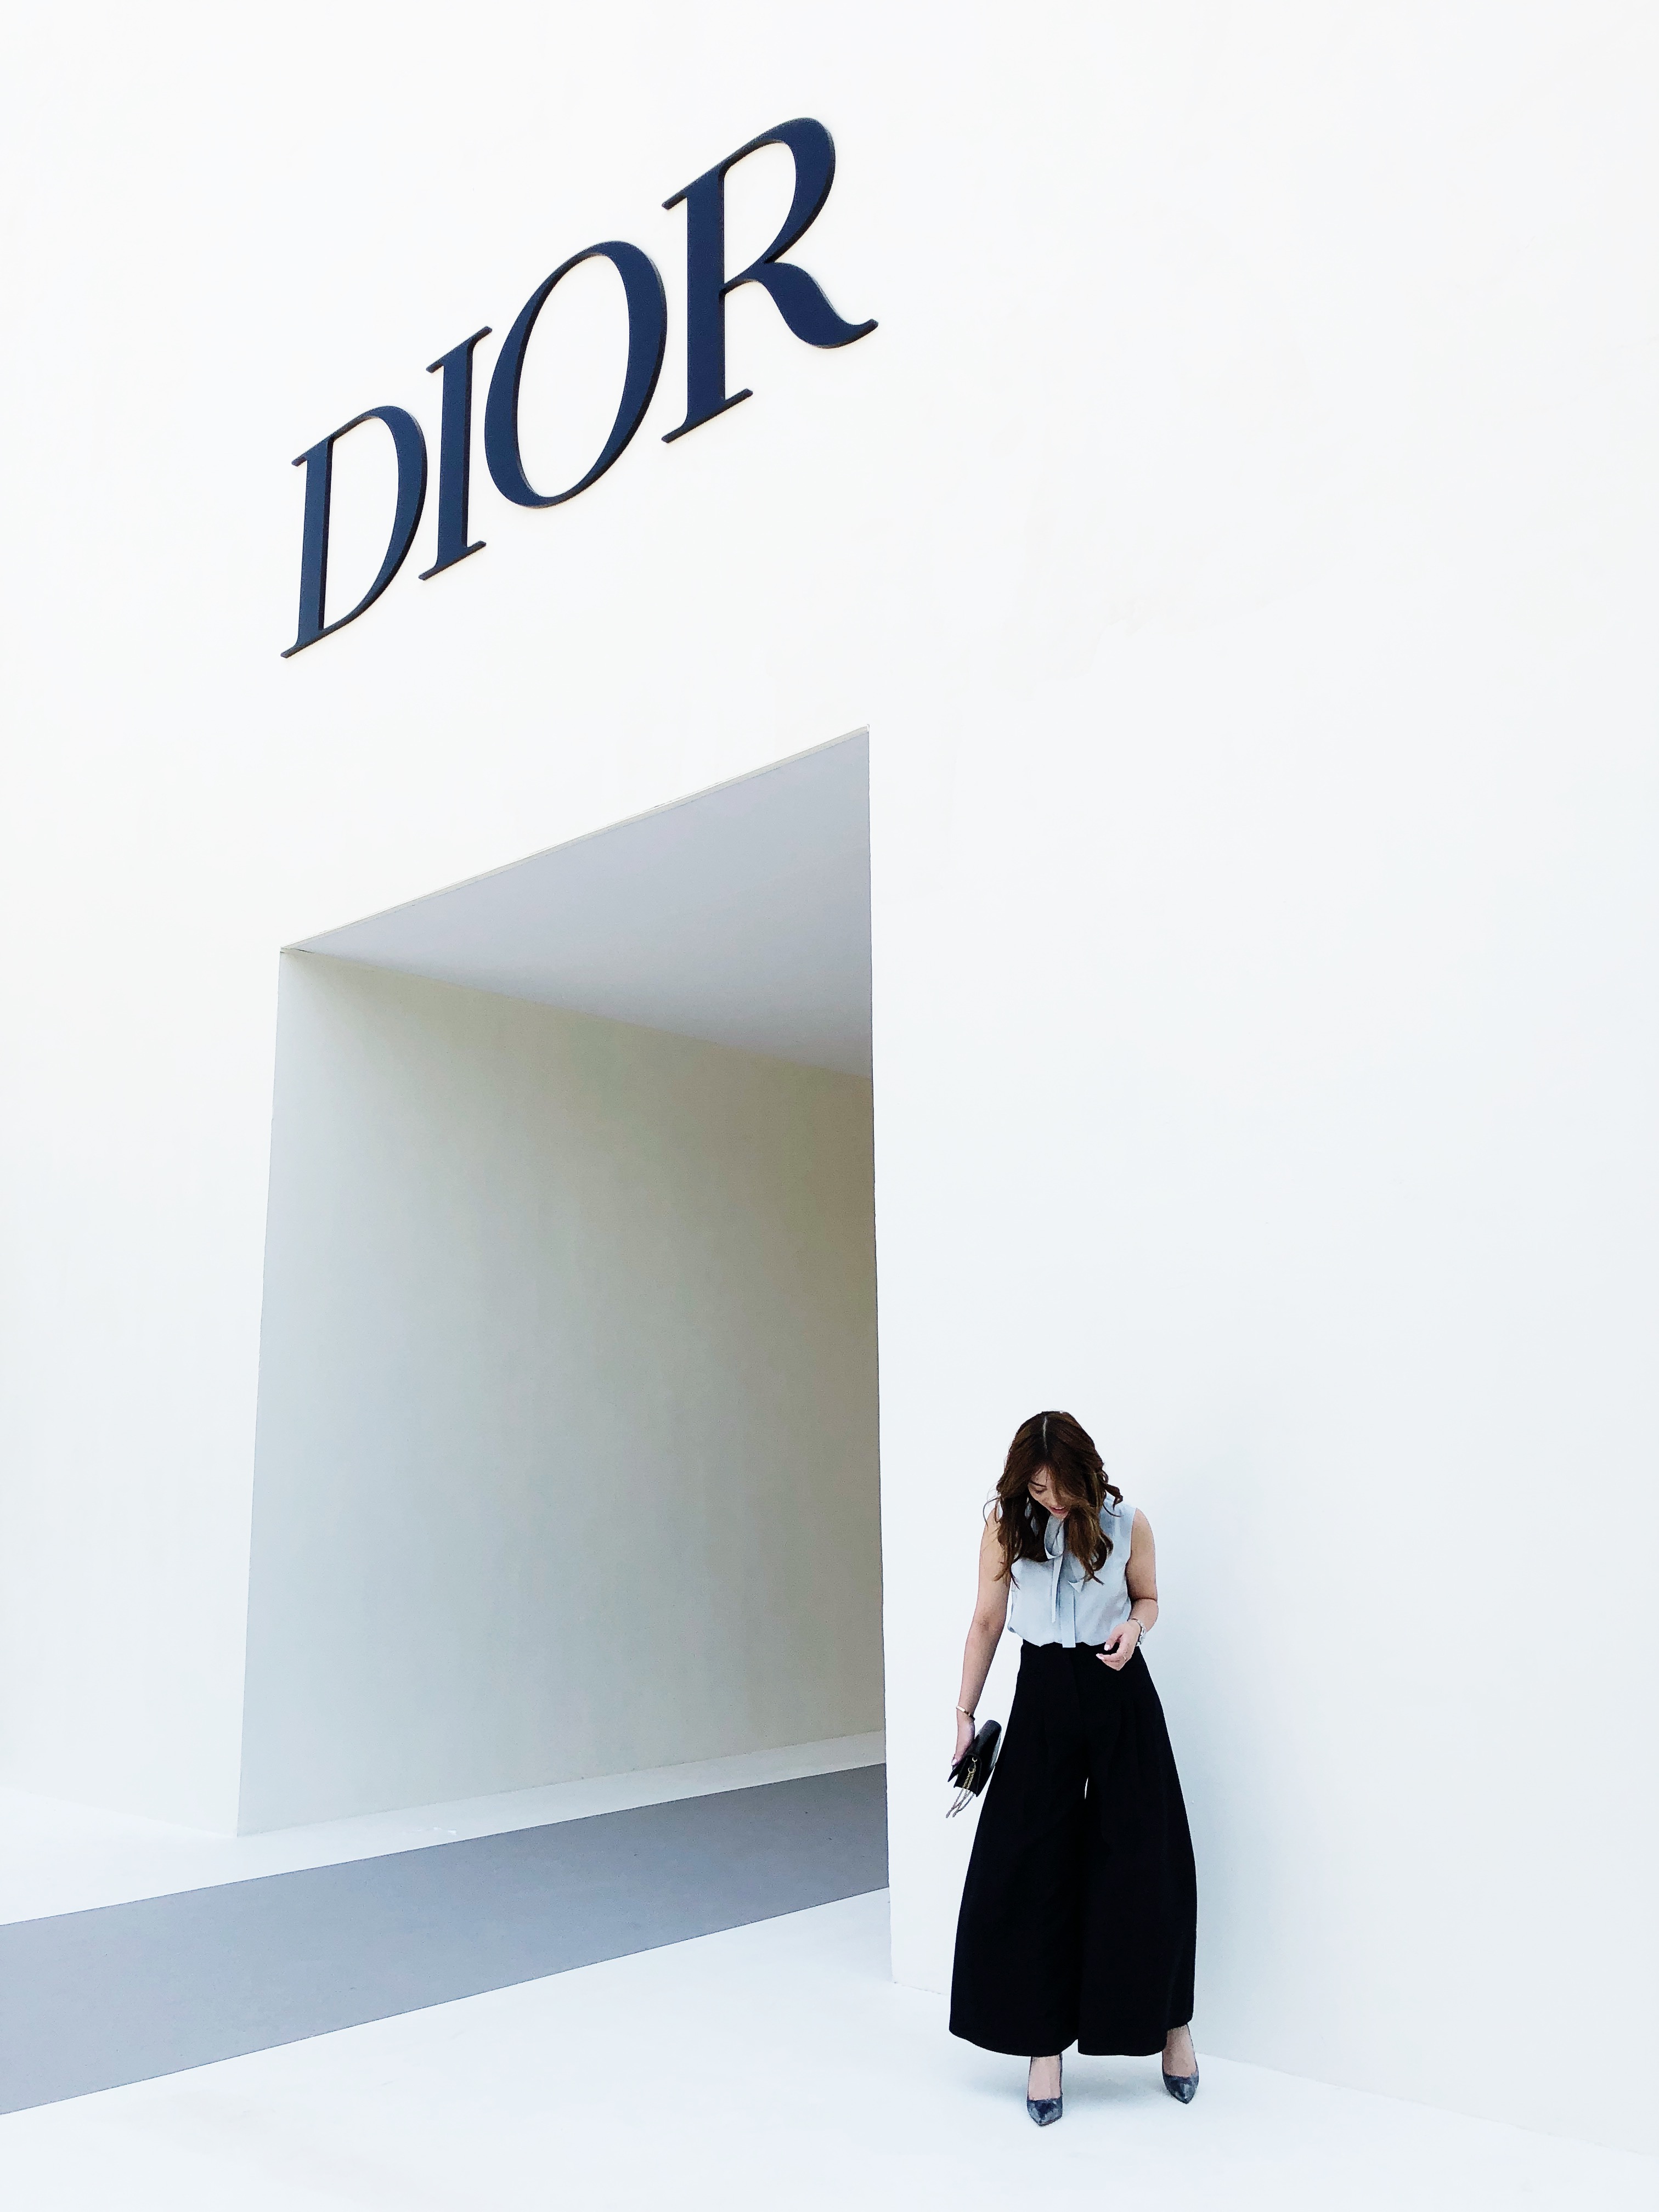 Cheryl's arrival at the Dior show